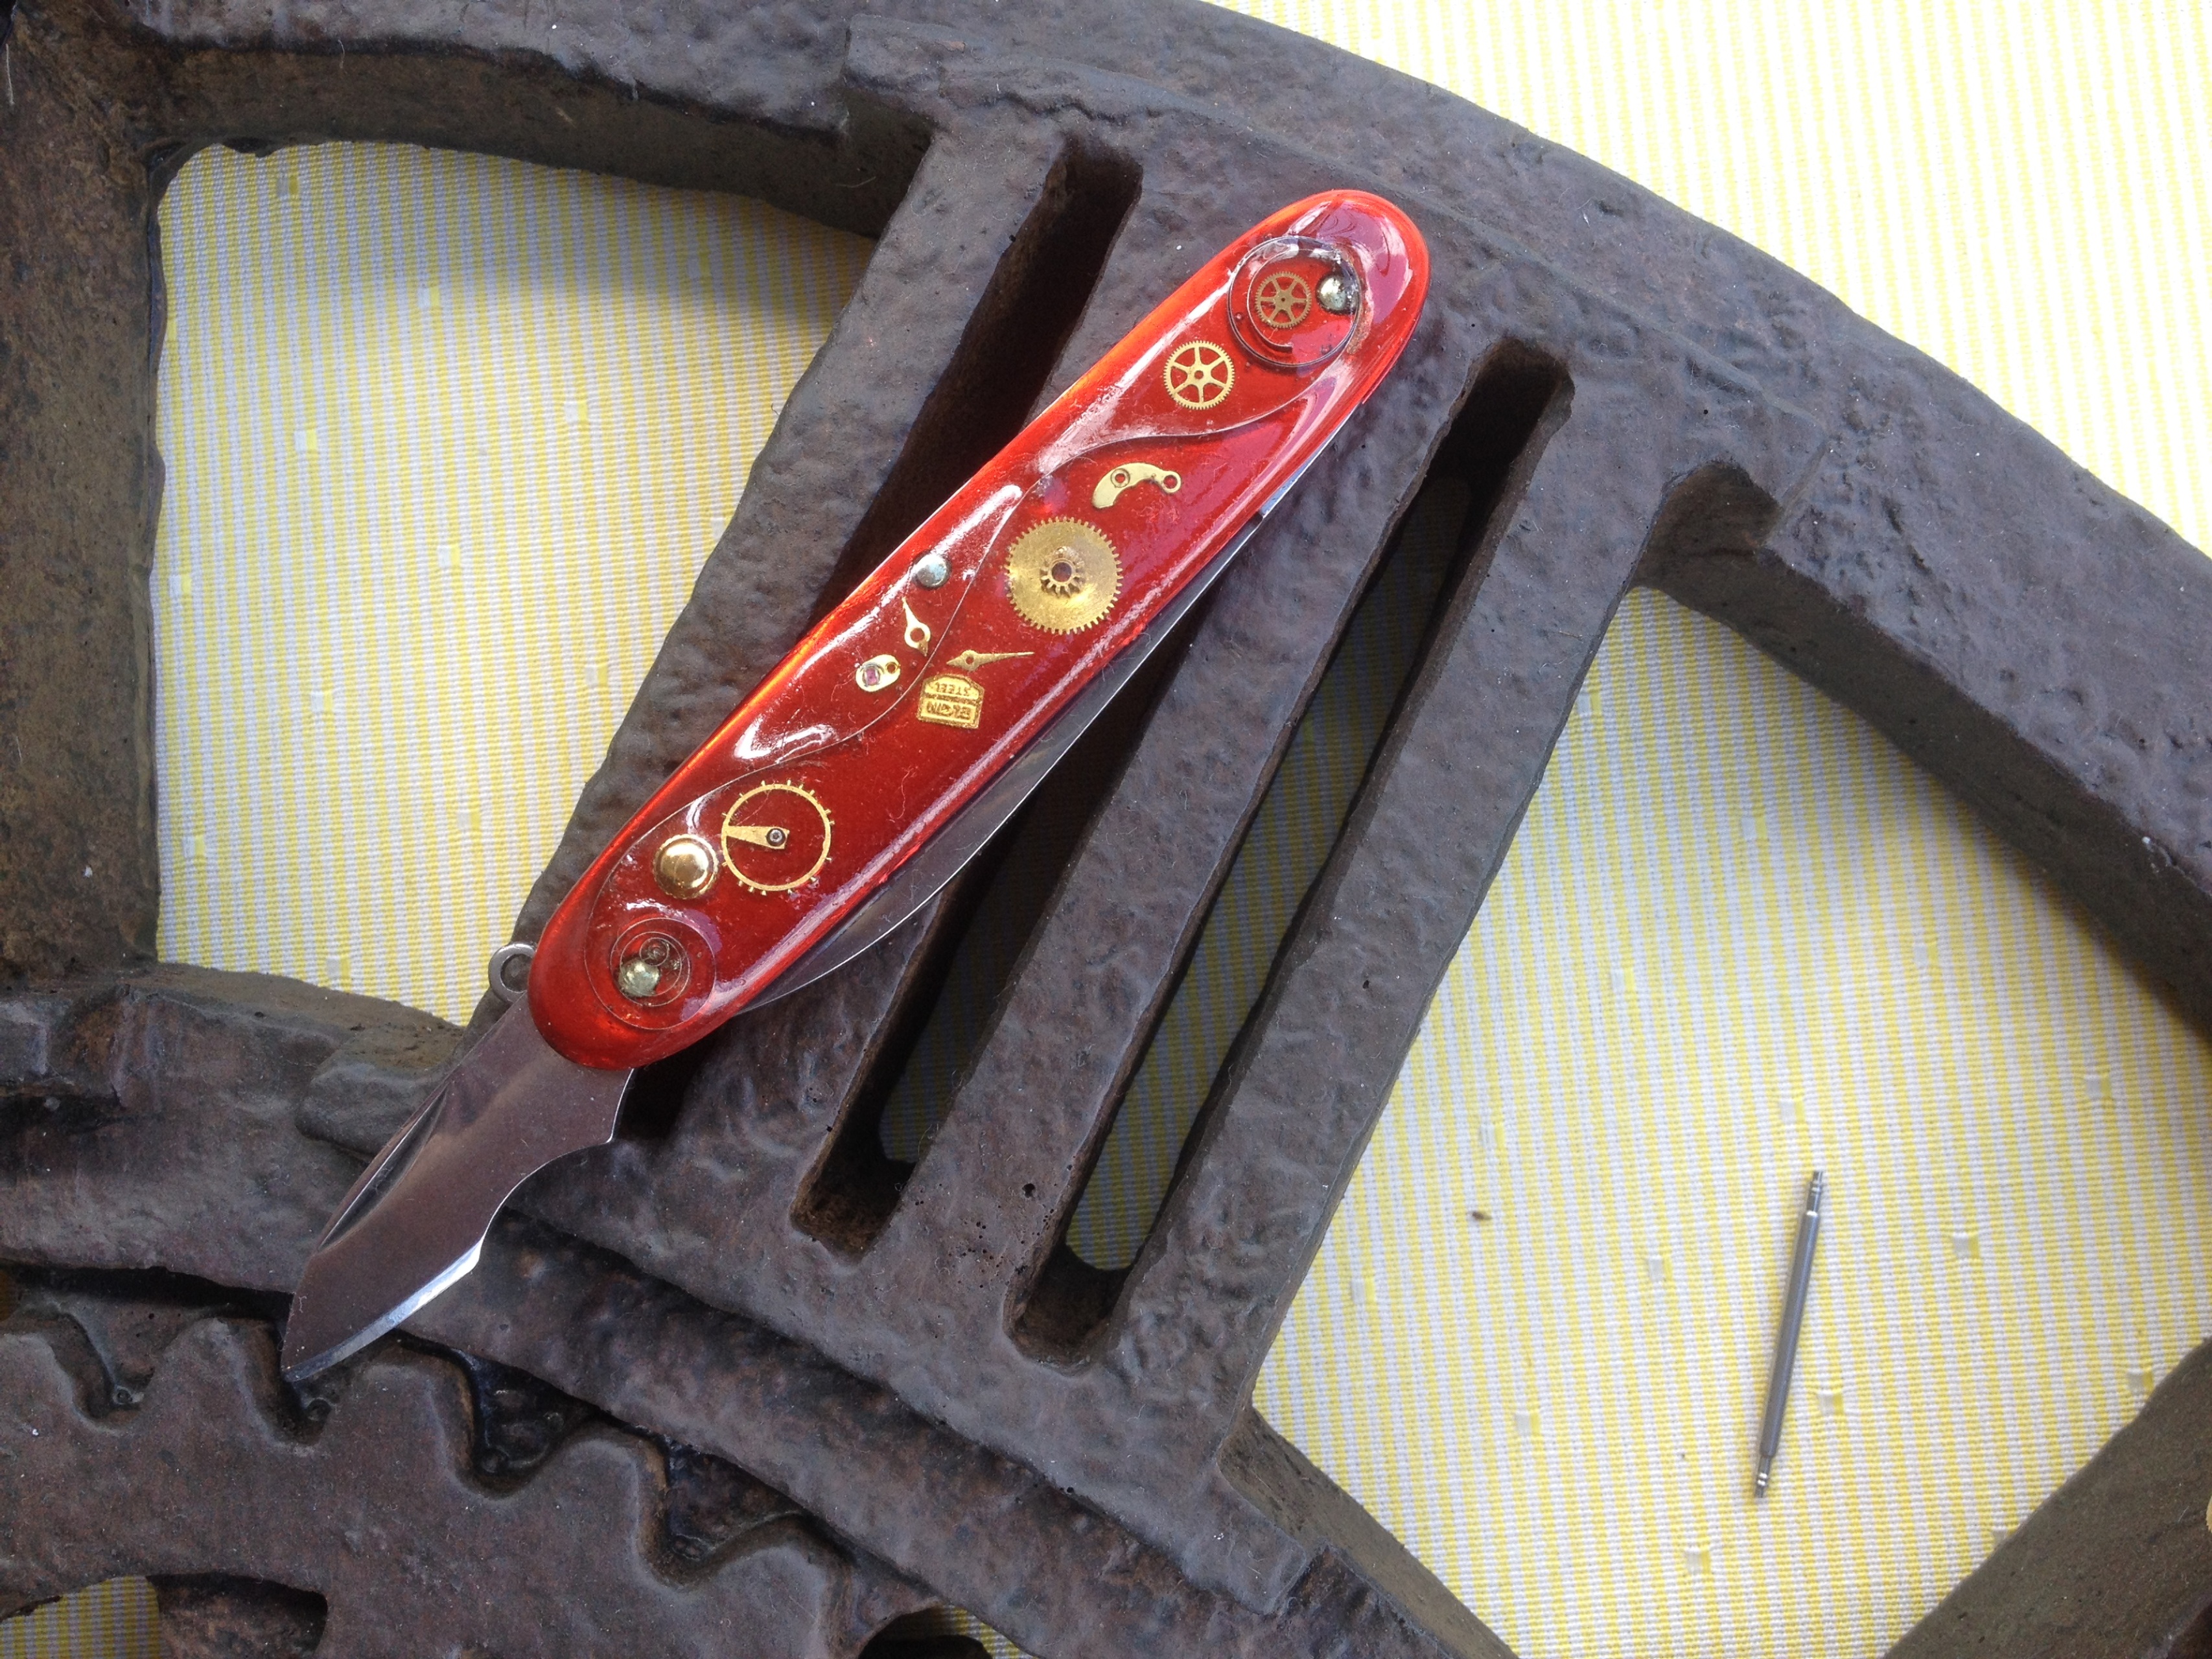 Bench Watch Knife - Watchmaker's Deluxe